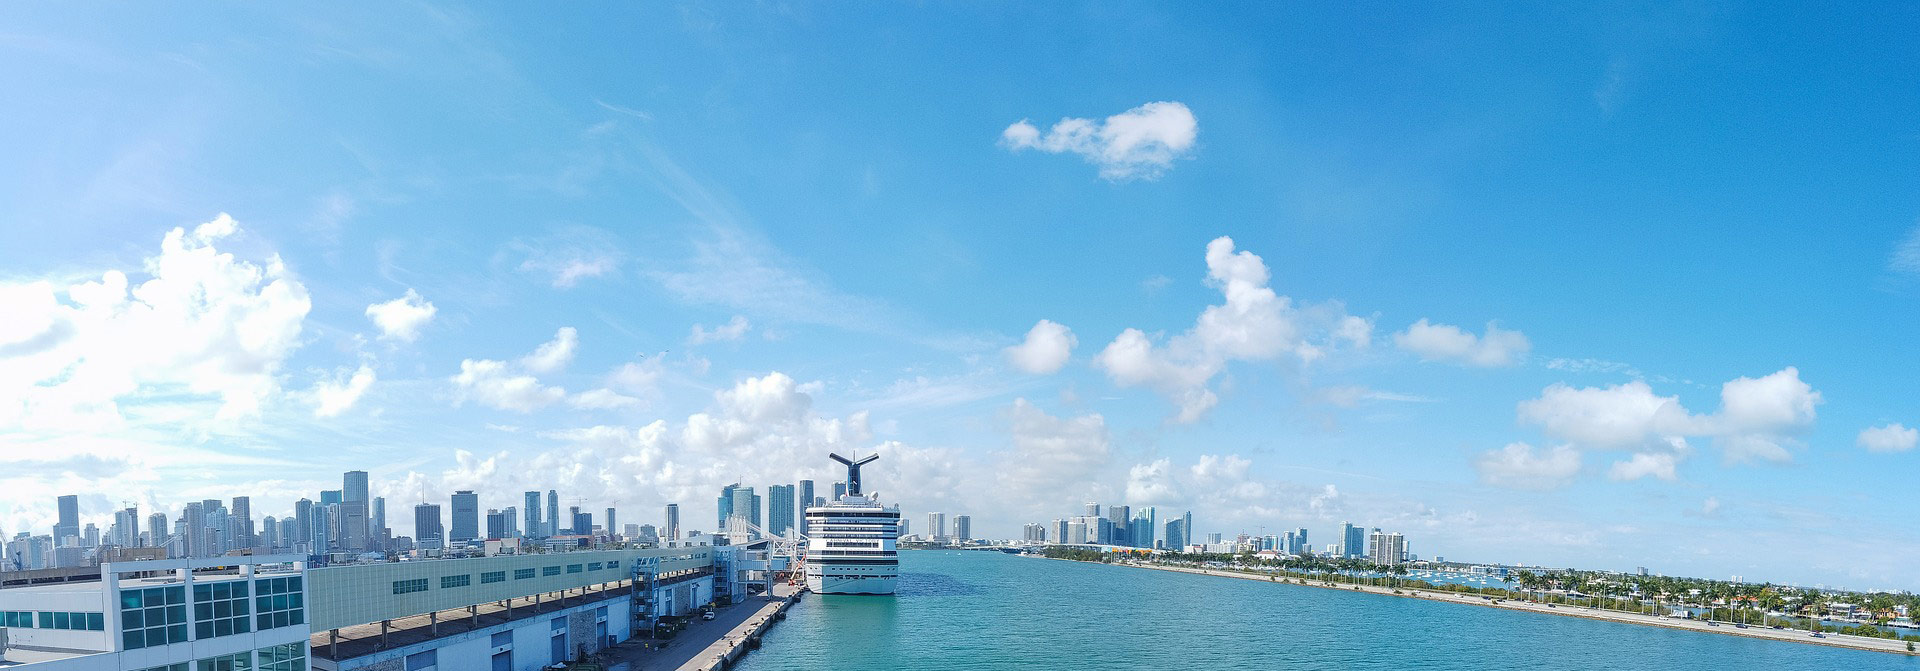 2021 Florida Cruises: Where Can I Depart From? | The Cruise Web